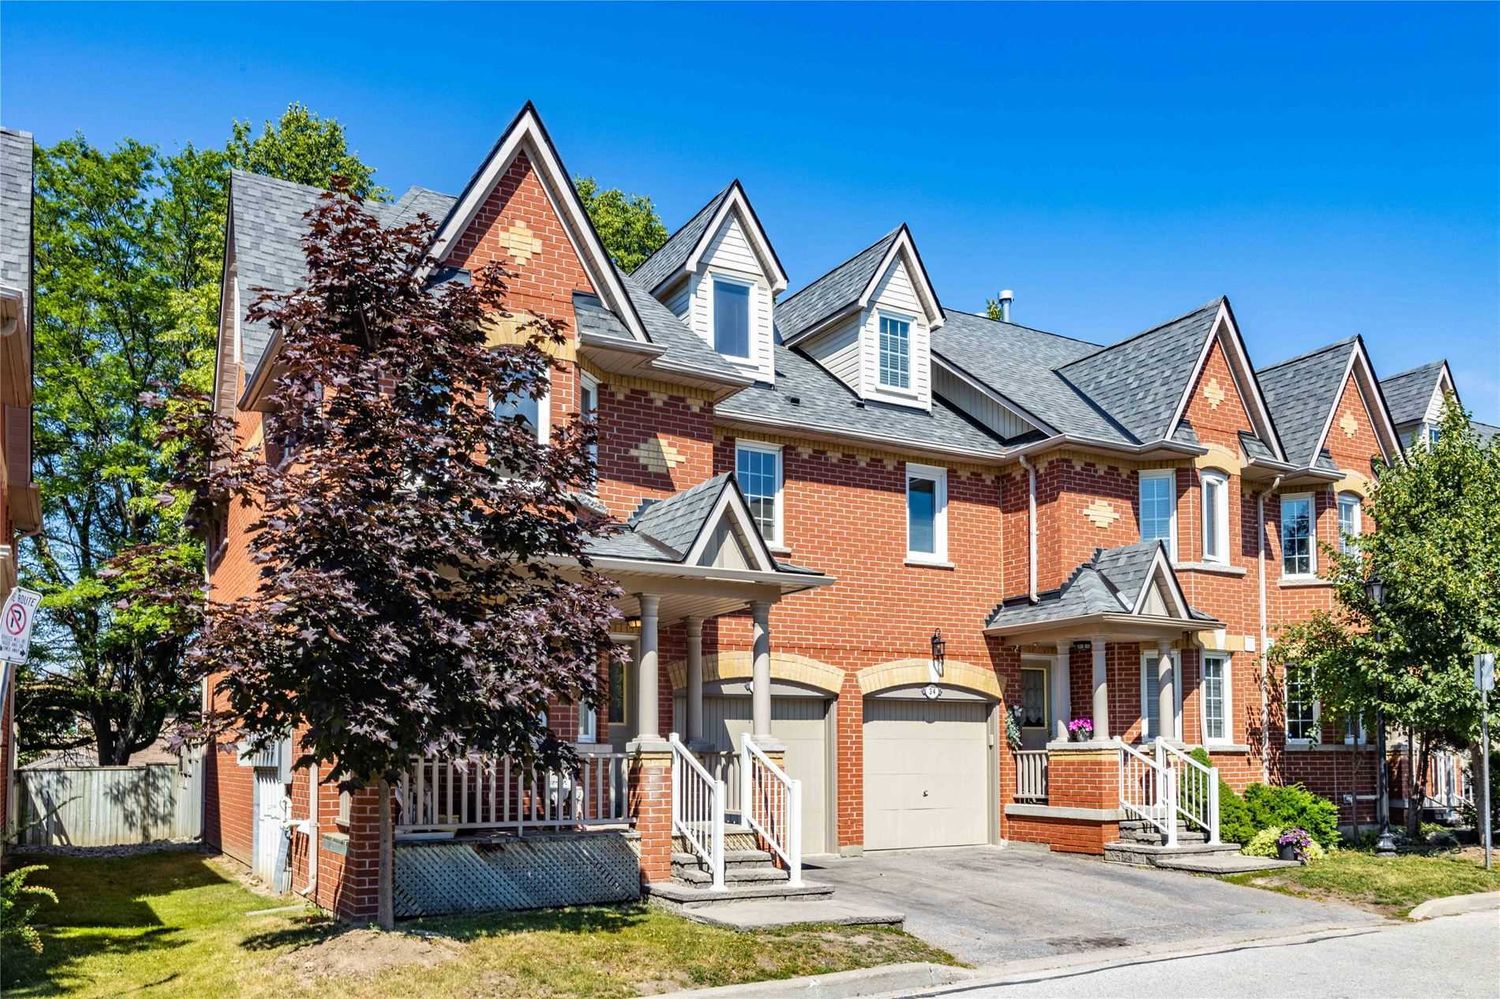 1-49 Marmill Way. Olde Markham Village is located in  Markham, Toronto - image #1 of 2